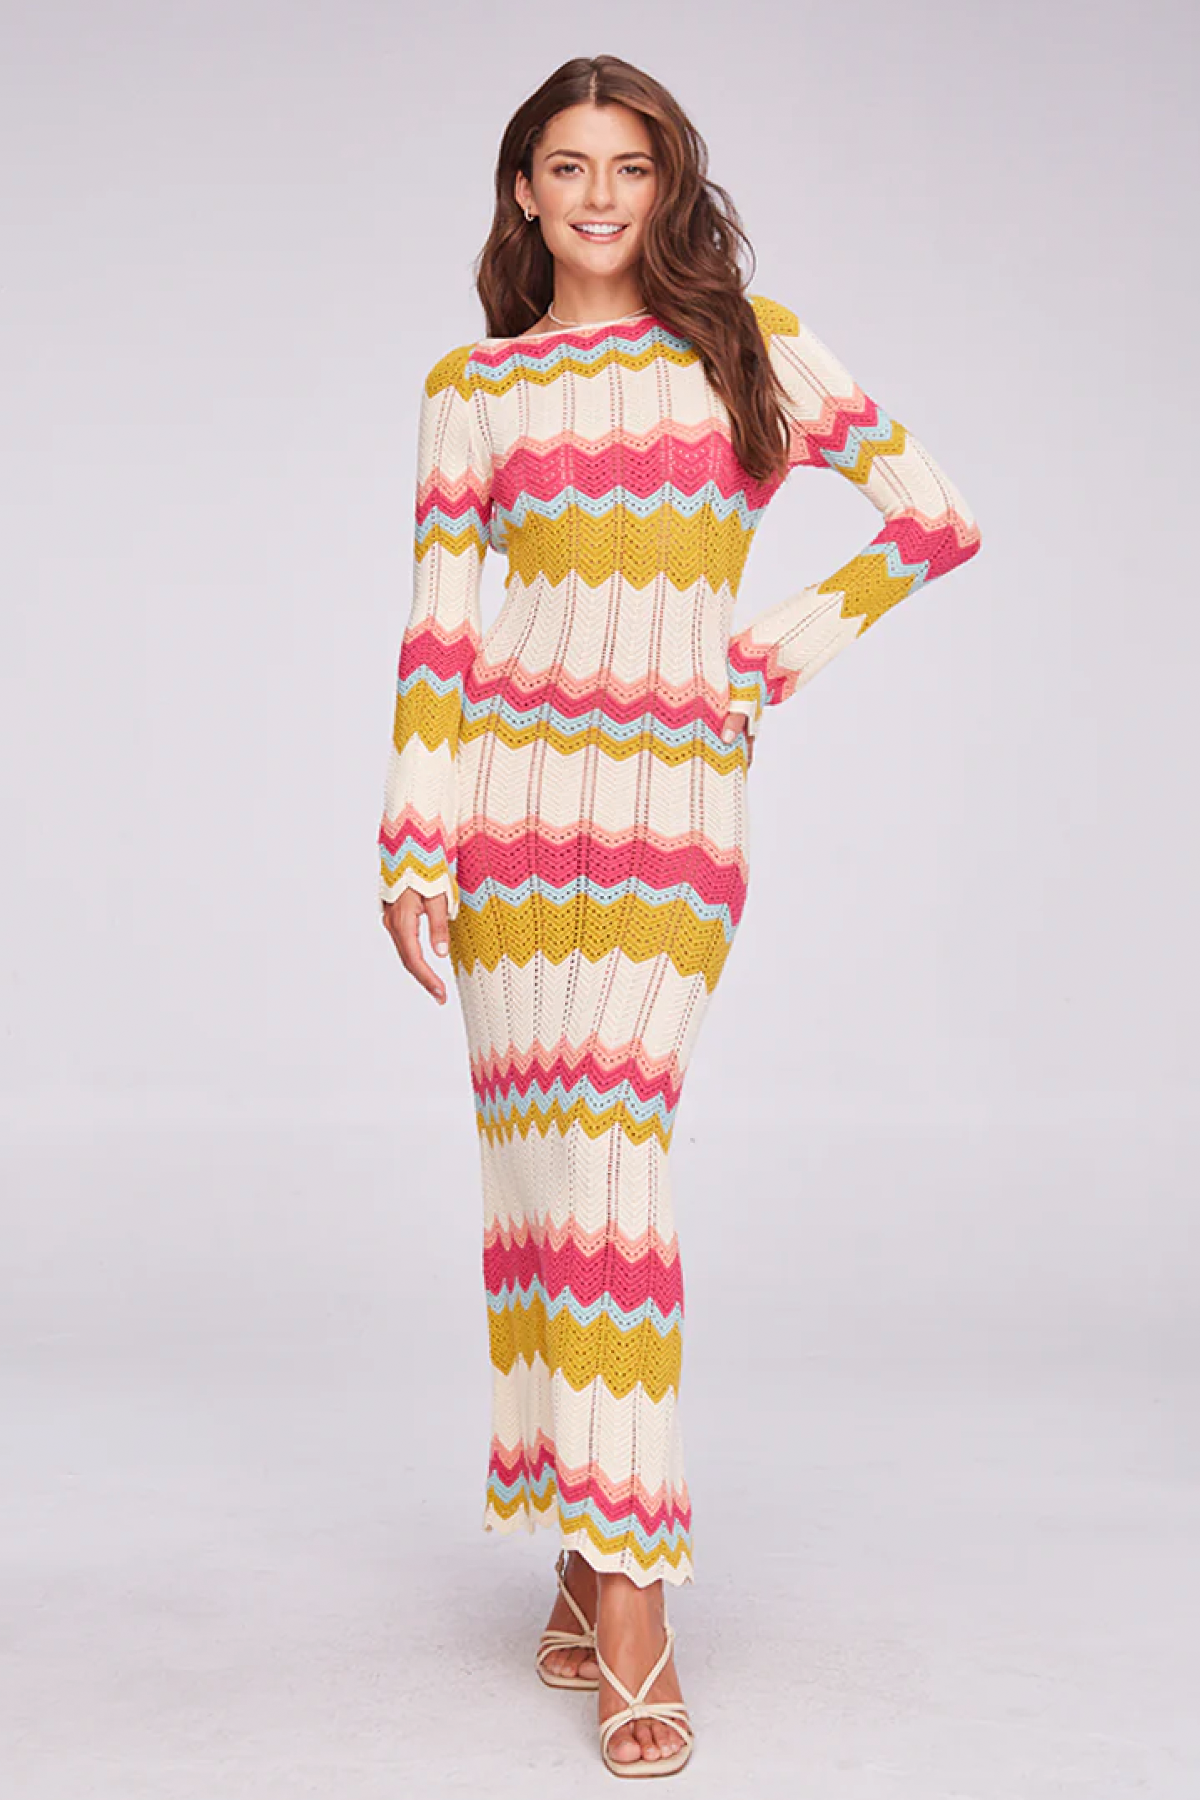 Capittana Piper Multicolor Knitted Dress